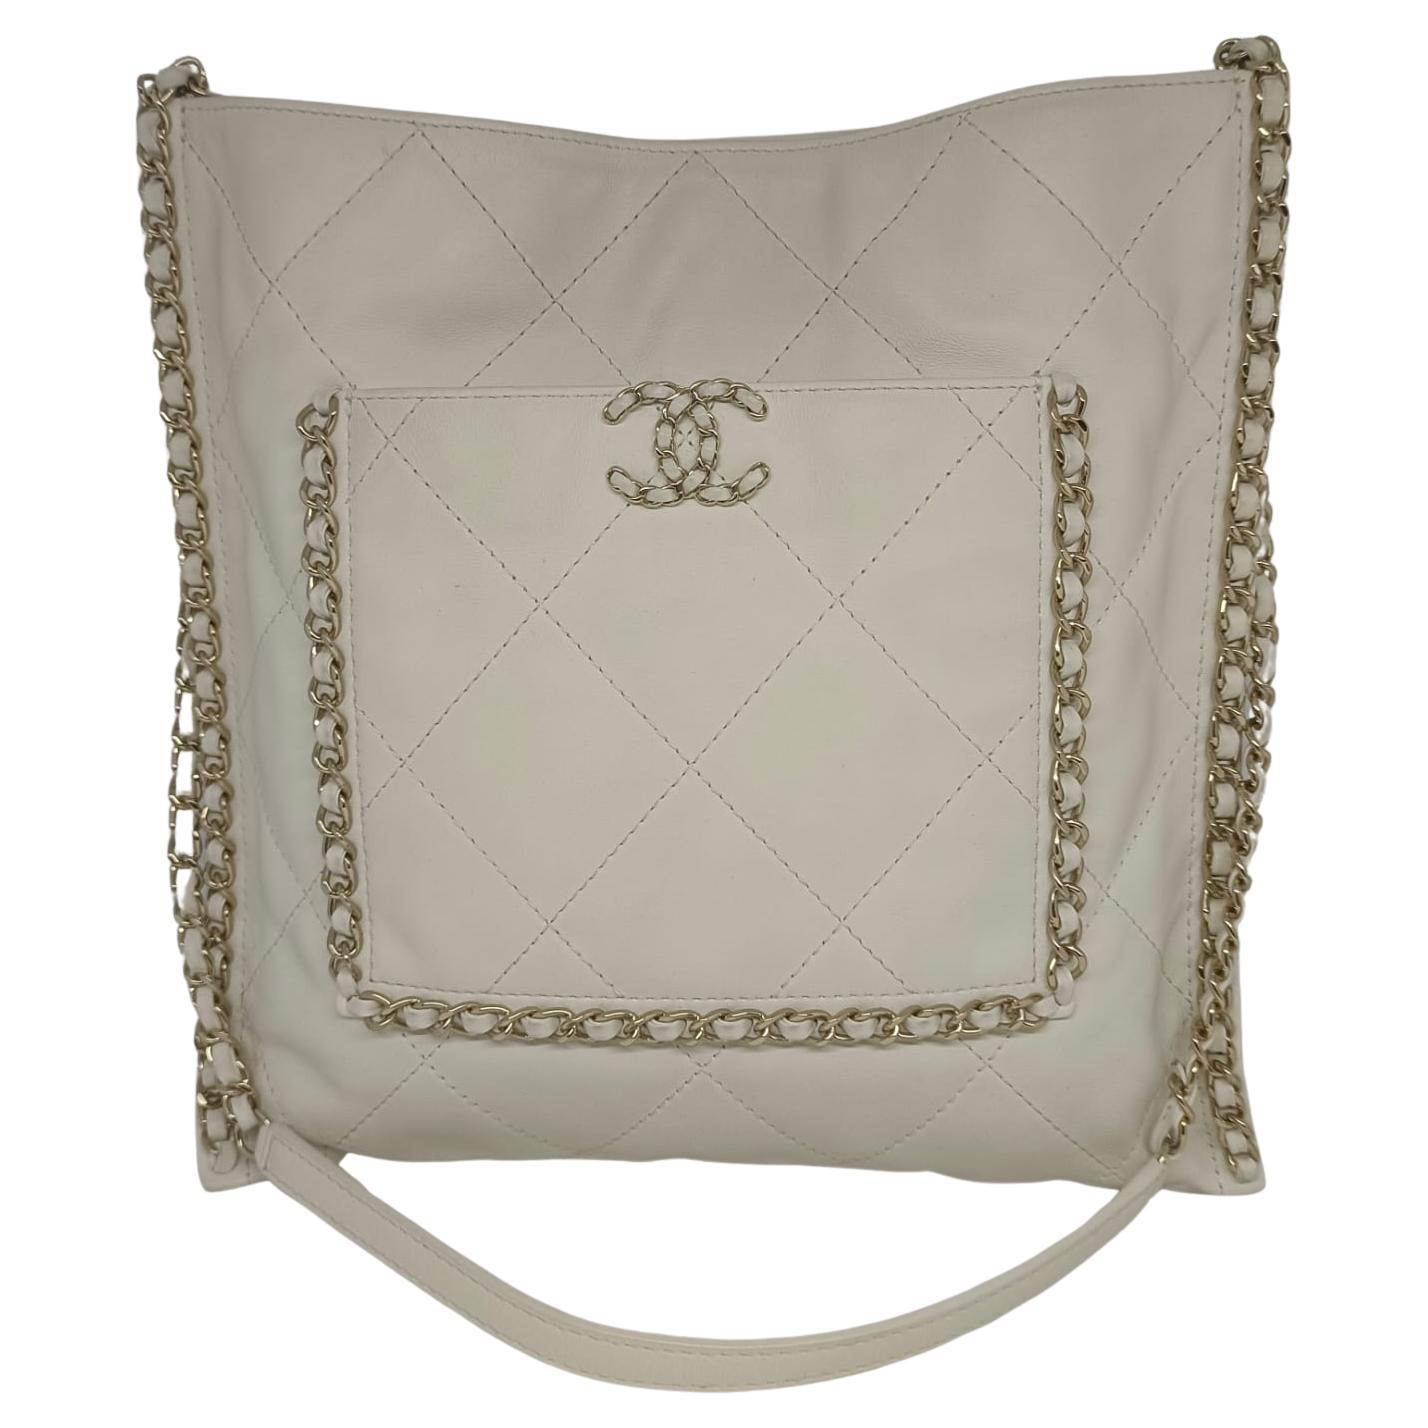 2022 Chanel White Calfskin Quilted Chain Trimmed Flat Tote Bag